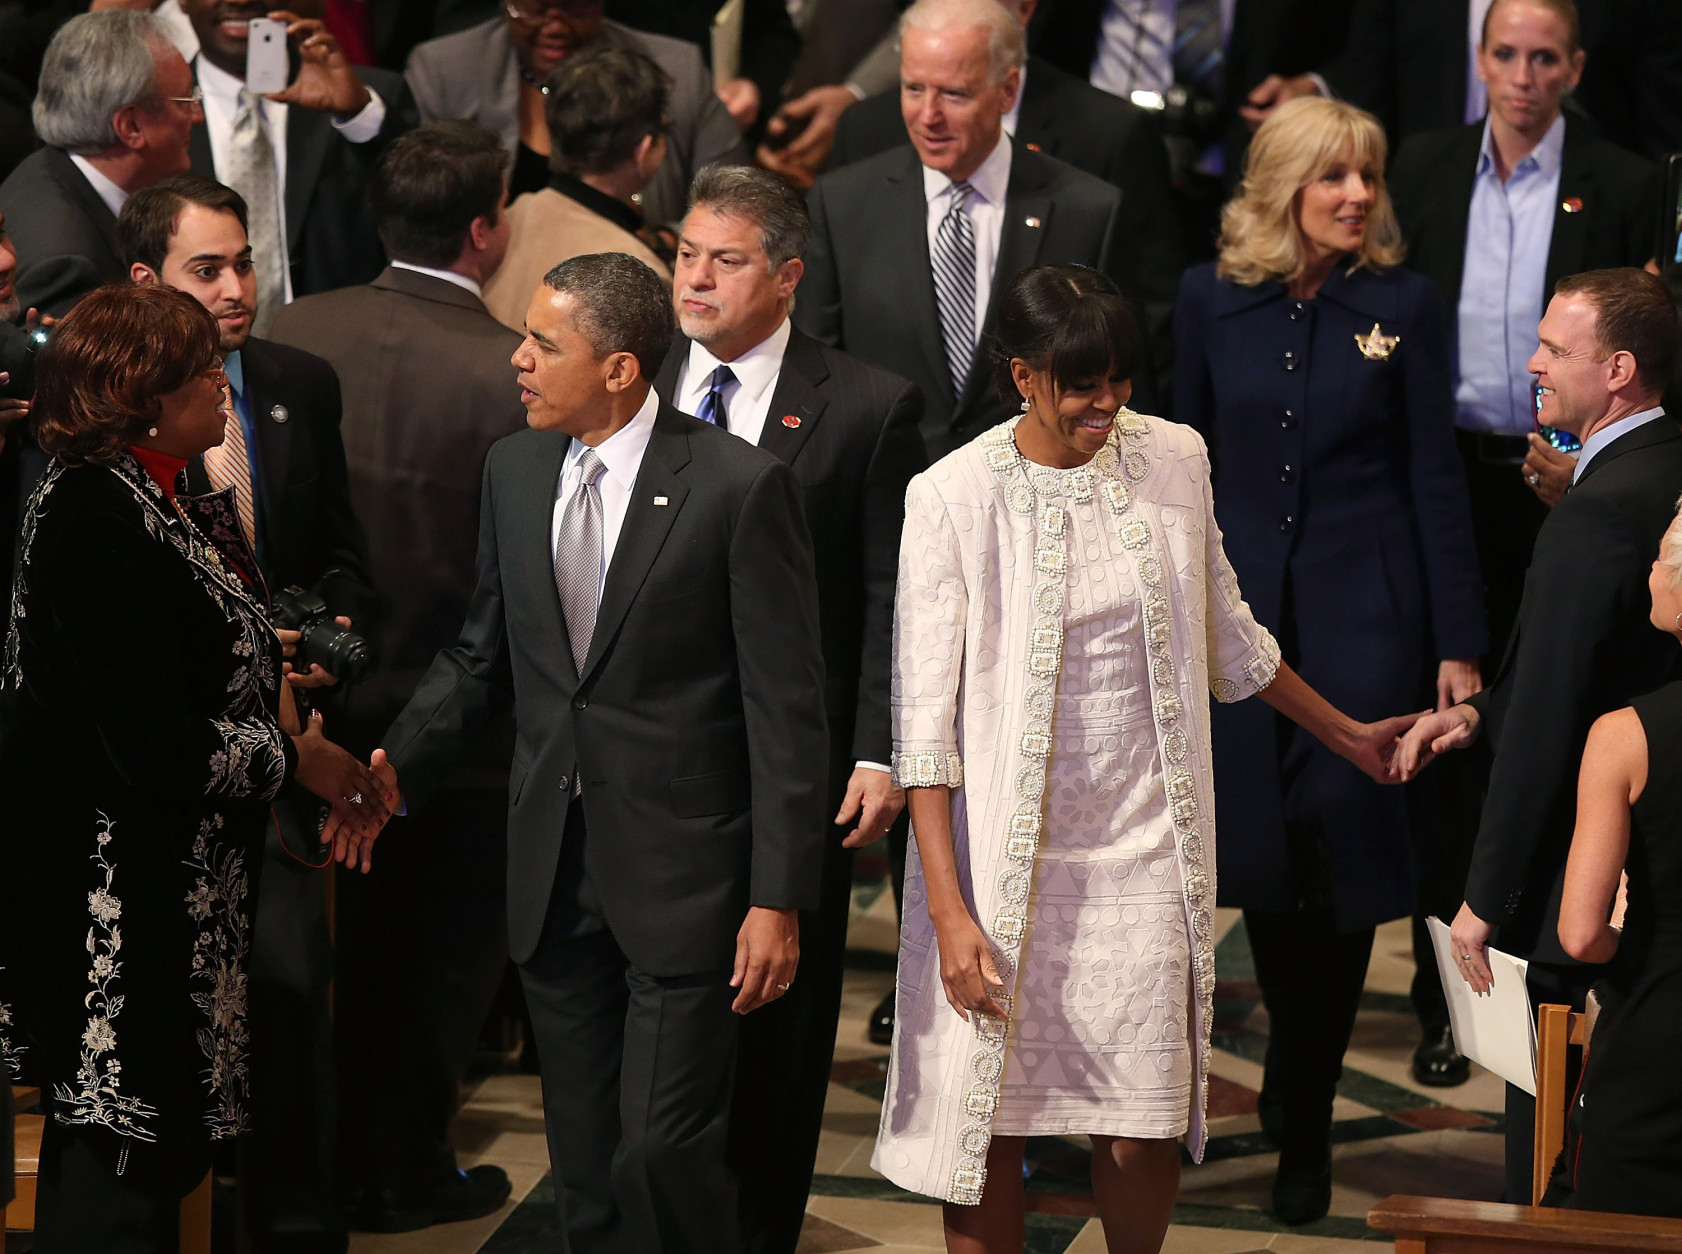 WASHINGTON, DC - JANUARY 22:  U.S. President Barack Obama and first lady Michelle Obama arrive at the National Prayer Service at the National Cathedral, on January 22, 2013 in Washington, DC. President Obama was sworn in on January 20 for his second term as President of the United States.  (Photo by Mark Wilson/Getty Images)